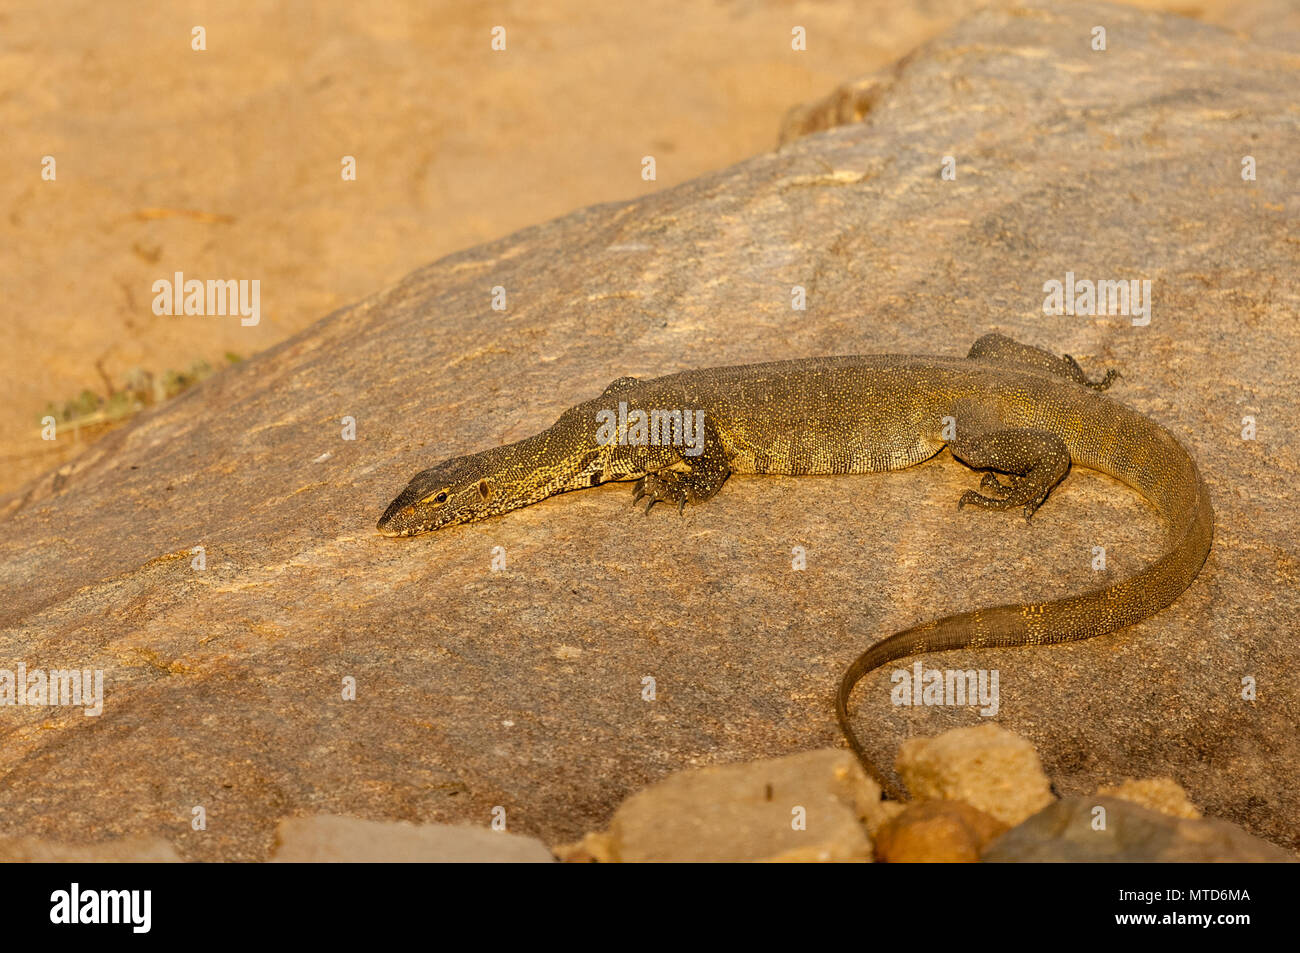 A Monitor lizard basking on a rock at Sabi Sands Game Reserve Stock Photo